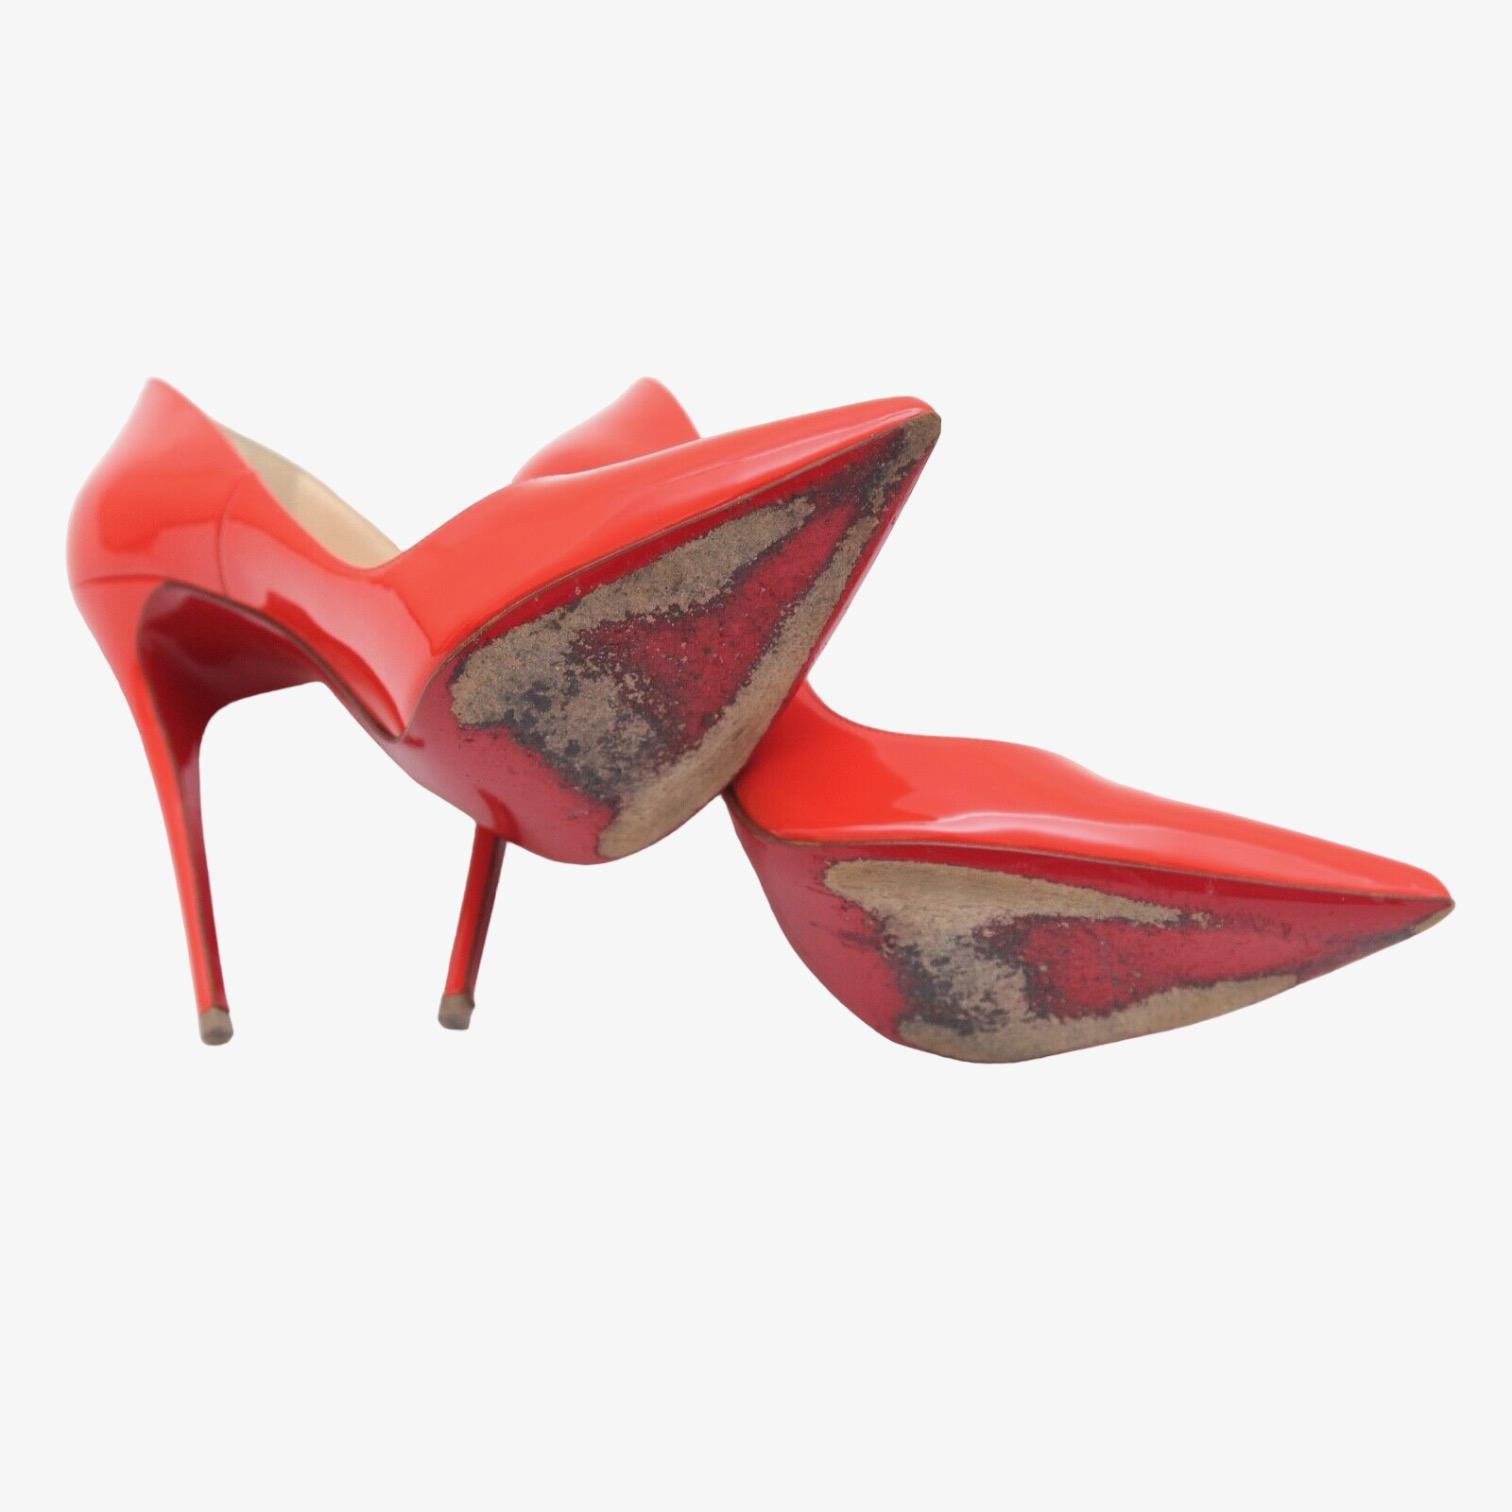 CHRISTIAN LOUBOUTIN Patent Leather Pump ORANGE SO KATE 120 Pointed Toe 38 For Sale 4